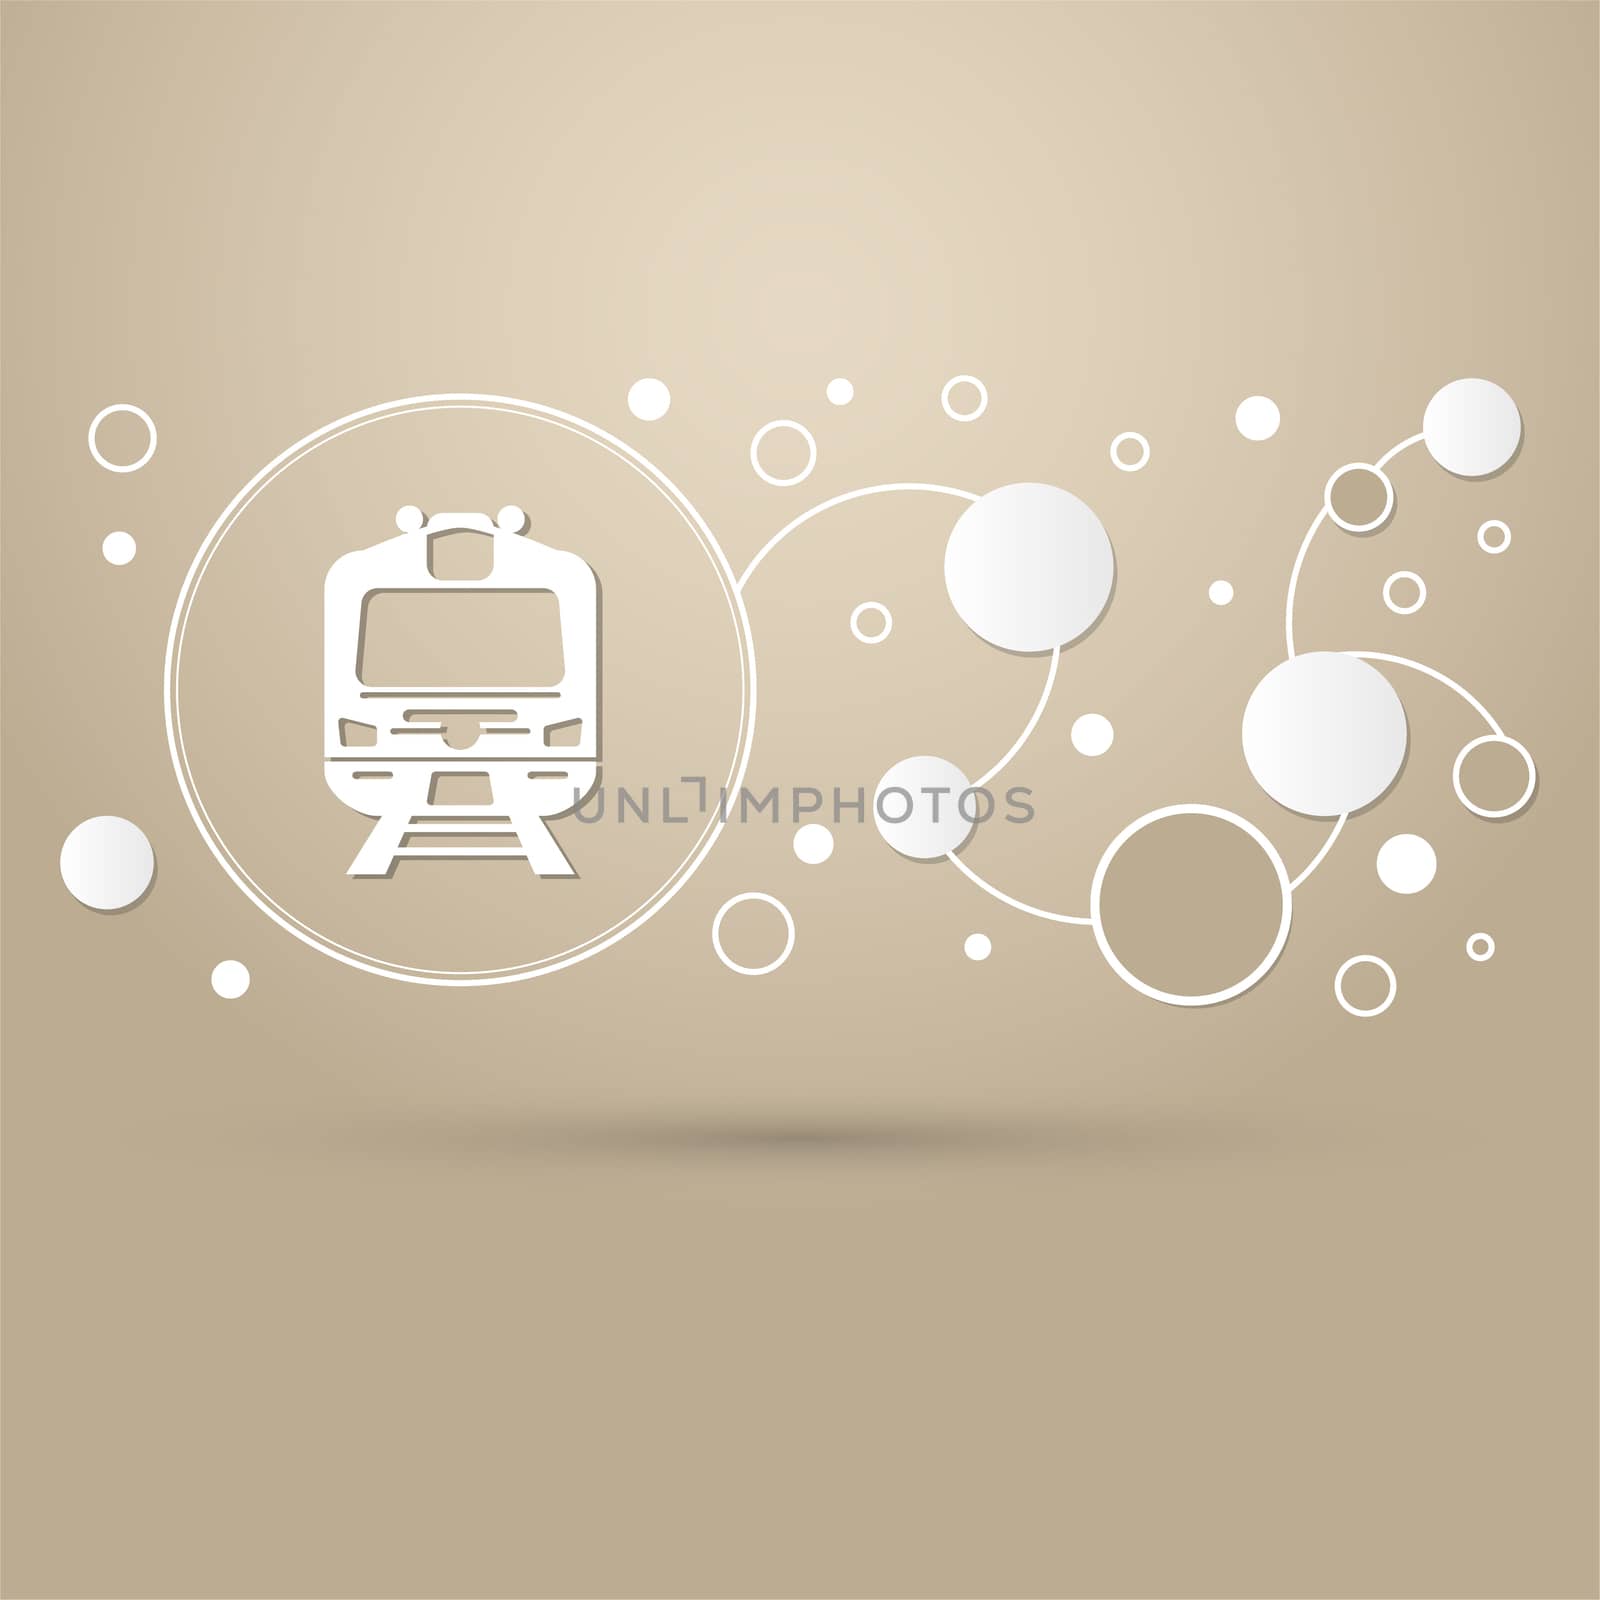 Train icon on a brown background with elegant style and modern design infographic.  by Adamchuk